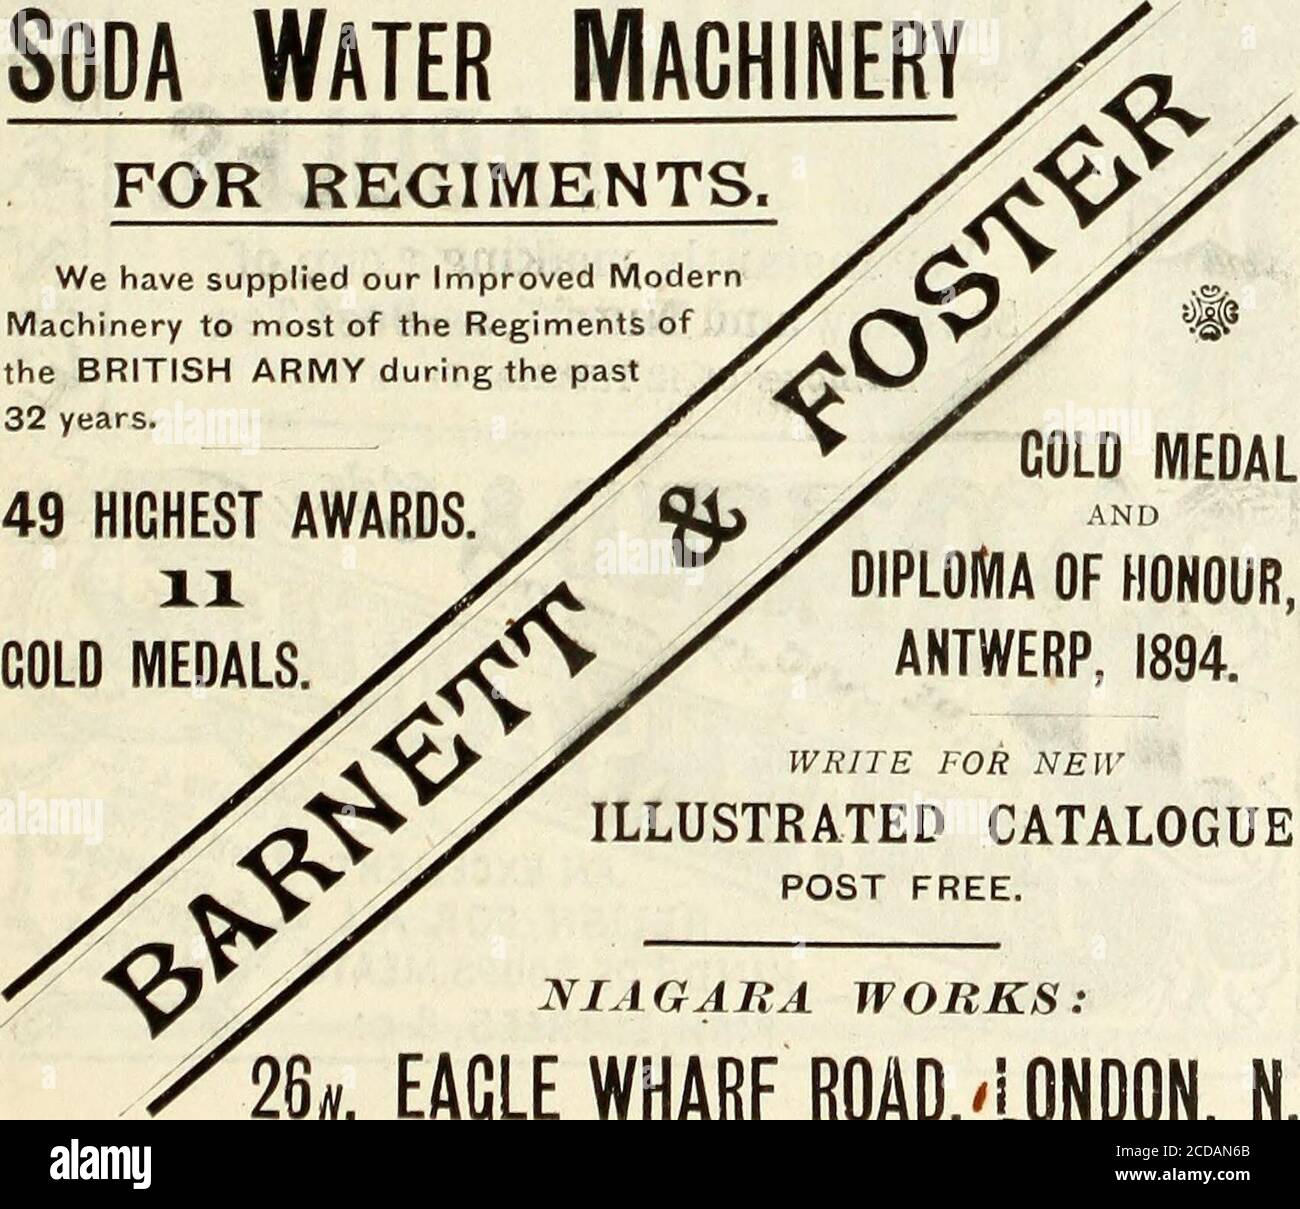 . Hart's annual army list, militia list, and imperial yeomanry list . Sporting Outfitters 6 Breeches MaRers,32, BROOK STREET, LONDON, W. Telecrams: SPORTINCLY, London. Telephone 4652 Cerrard. Soda Water machinery FOR REGIMENTS. We have supplied our Improved ModernMachinery to most of the Regiments ofthe BRITISH ARMY during the past32 years. 49 HIGHEST AWARDS.GOLD MEDAL! /X* w COLD MEDAL AND. DIPLOMA OF HONOUR,ANTWERP, 1894. WRITE FOR NEW ILLUSTRATED CATALOGUE POST FREE. ^7 / NIAGARA WORKS: k EAGLE WHARF ROAD .LONDON. N. PURVEYORS TO HIS MAJESTY THE KING. JBEEF TEA,VEAl,@y llt$e*V ^MUTTON & CHI Stock Photo